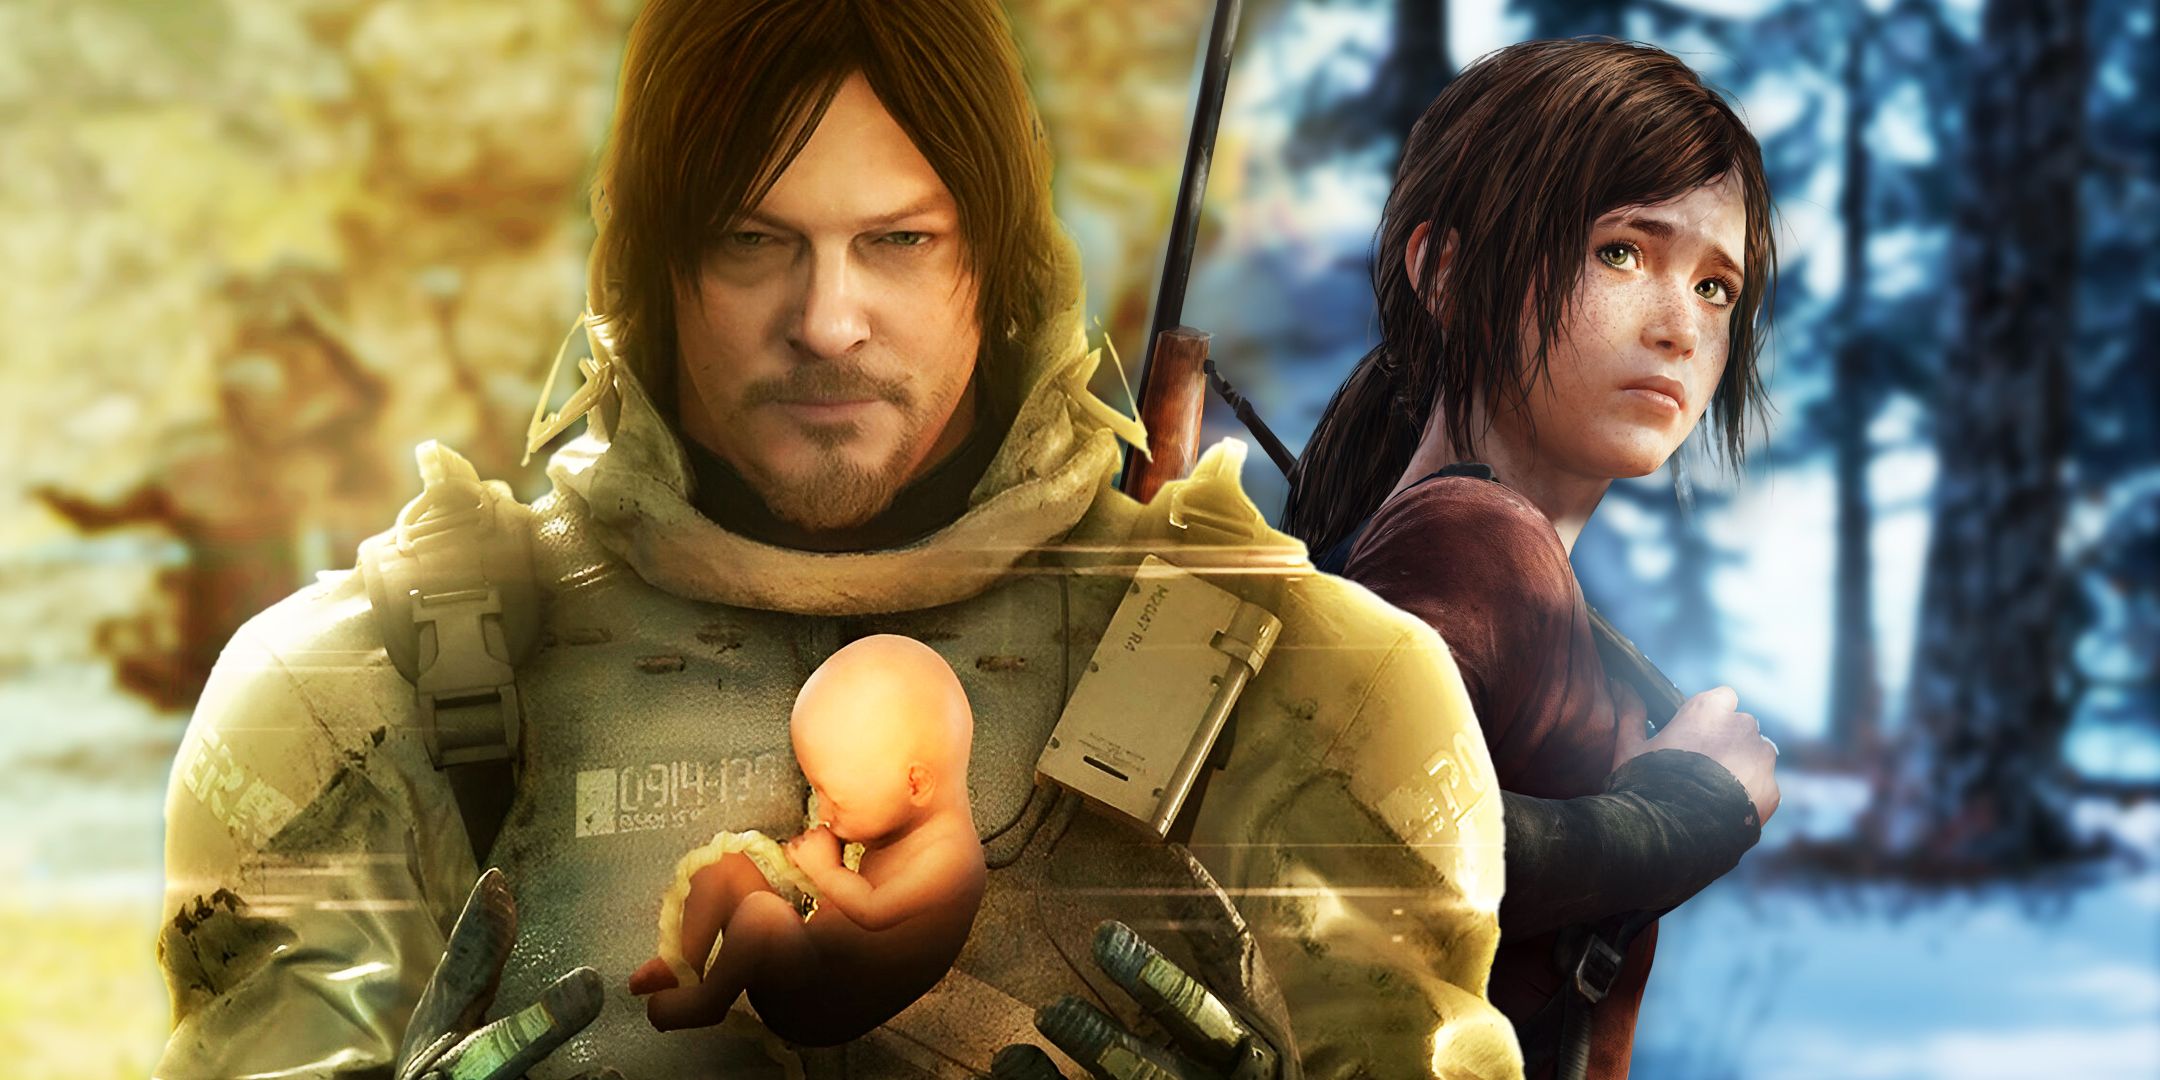 Horror games like a quiet place death stranding the last of us